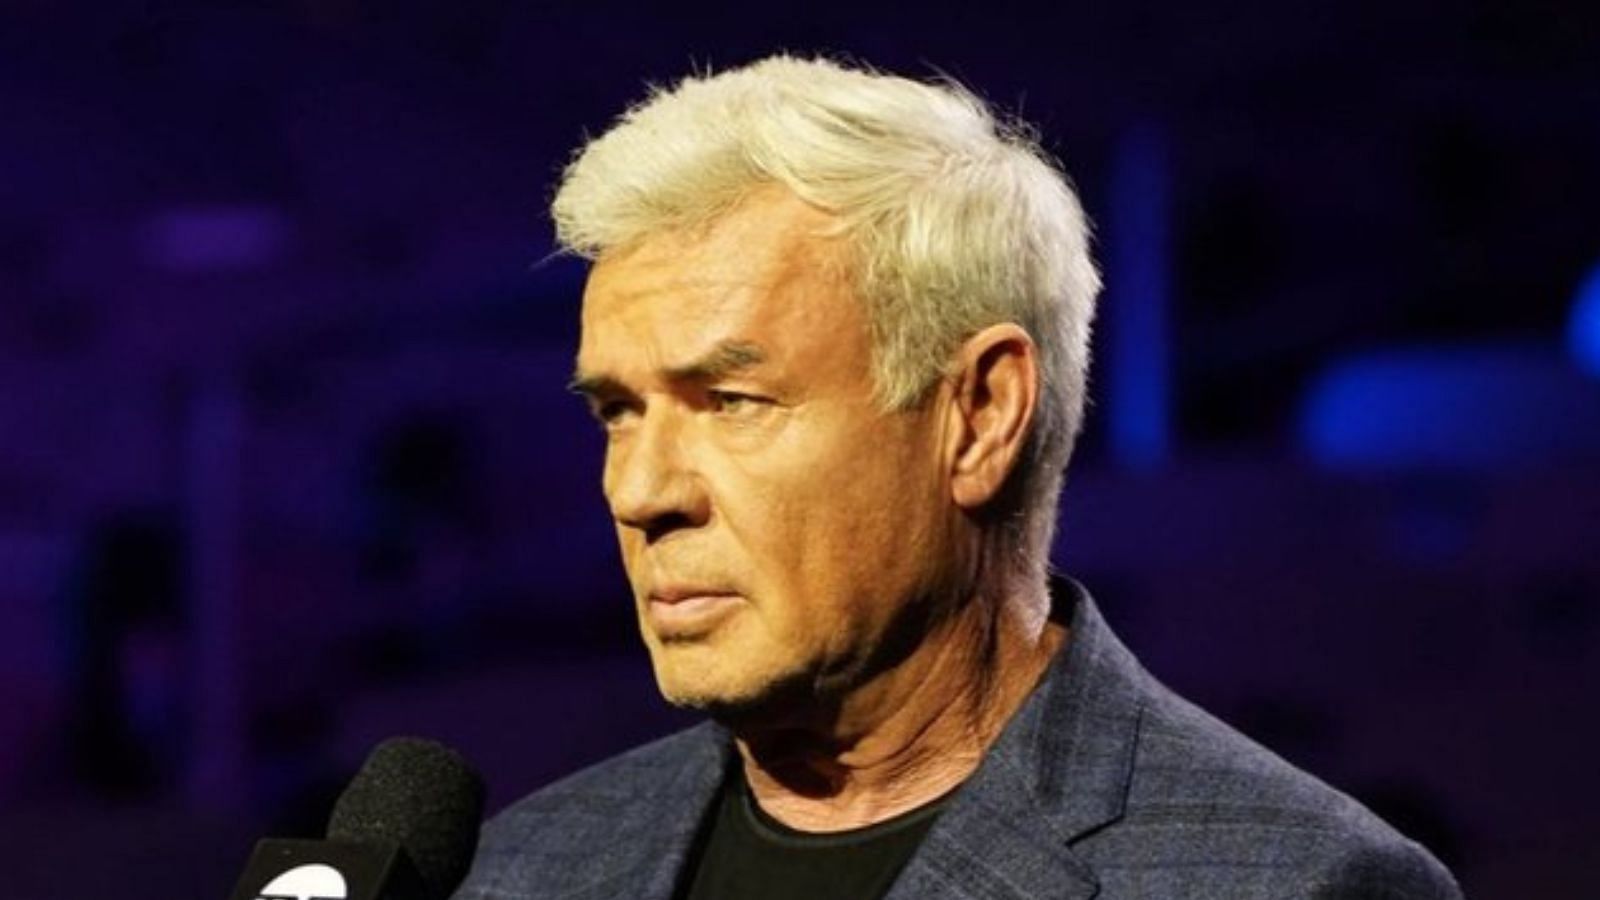 Eric Bischoff on wrestling legends taking spots from current stars